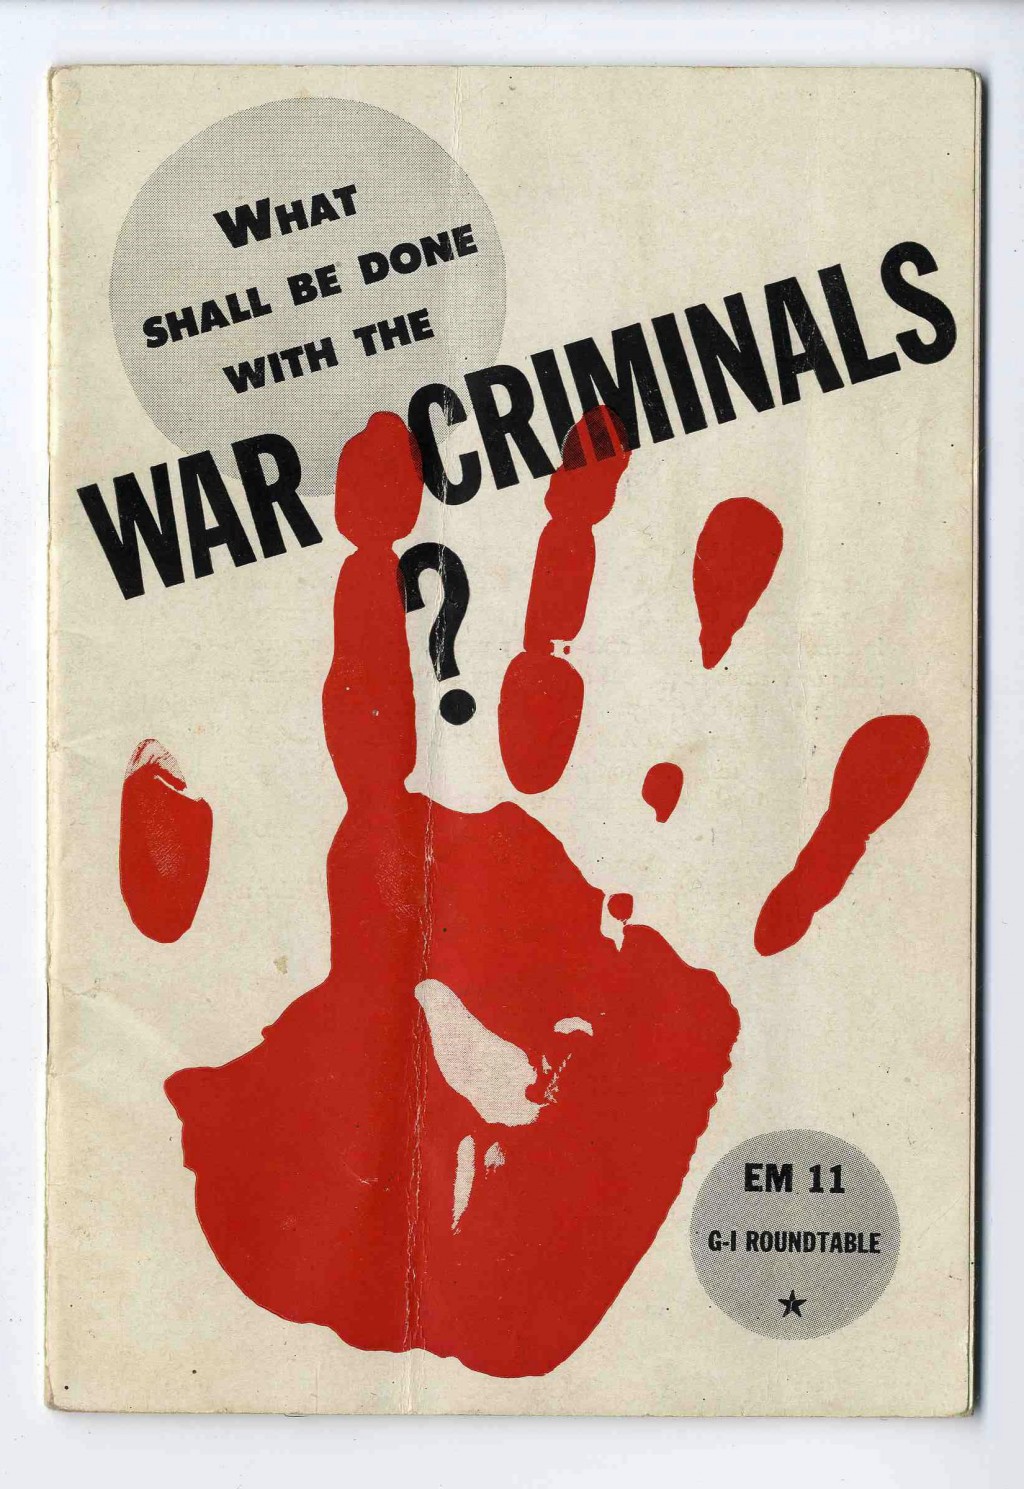 "What shall be done with the war criminals?" [LCID: 20058y6y]